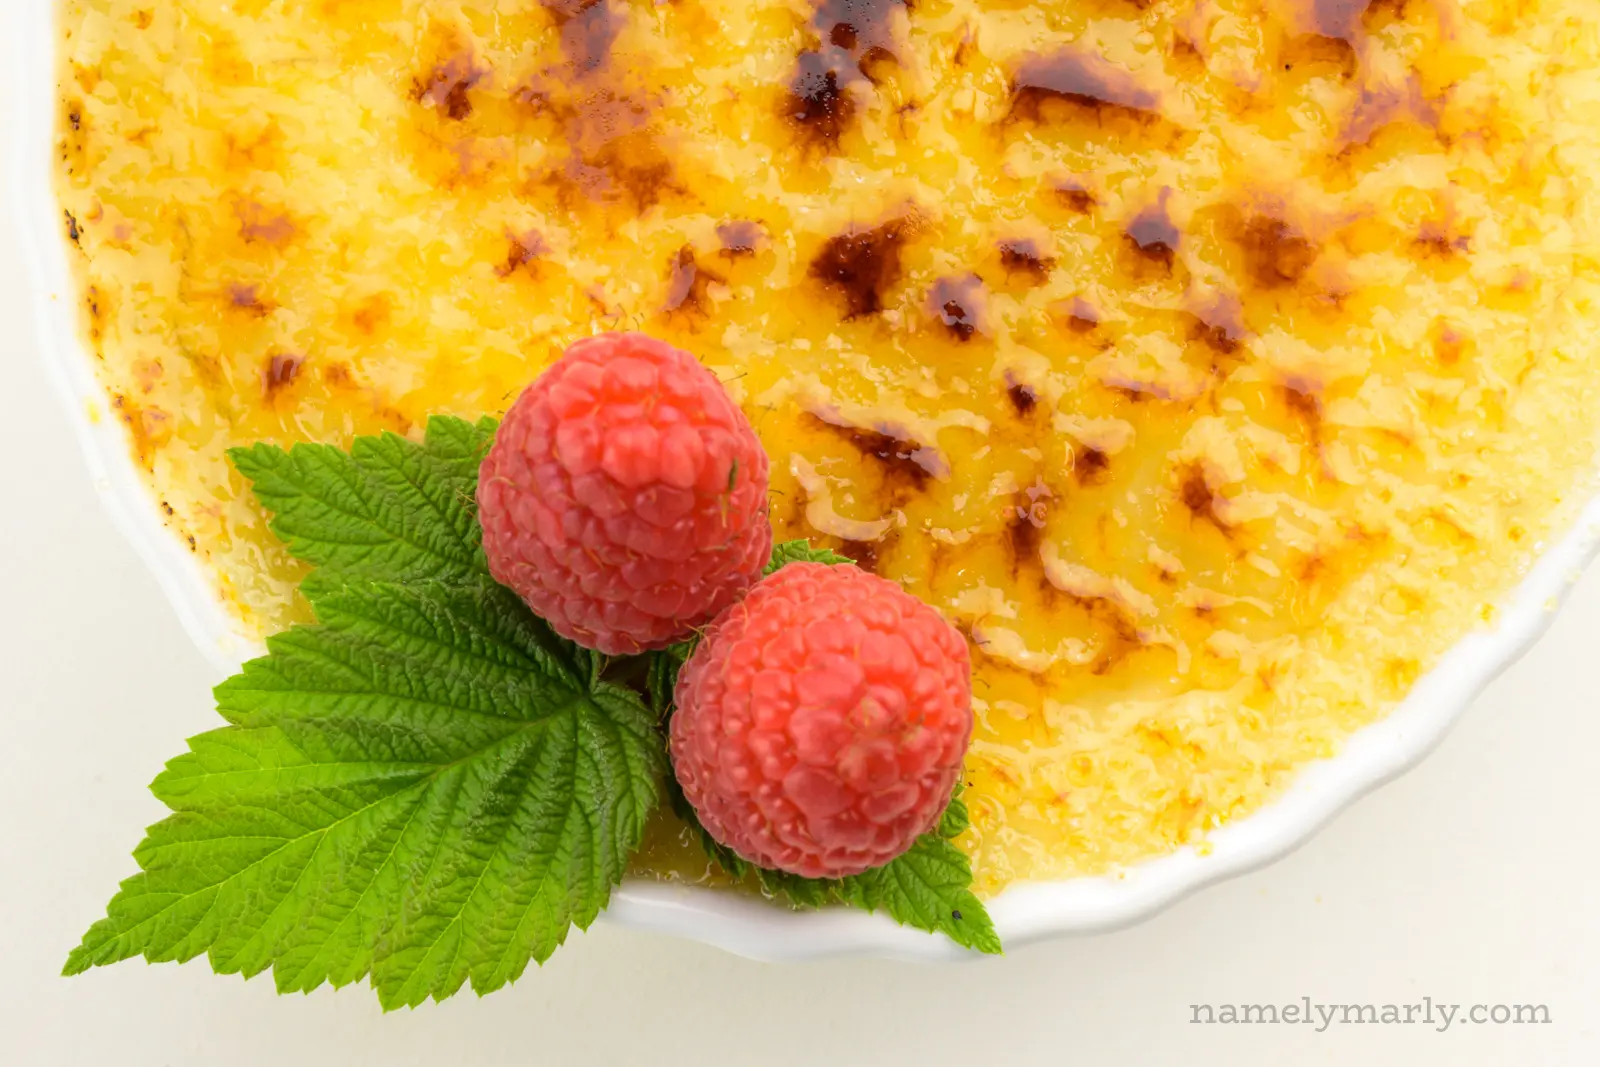 A close-up shot of creme brûlée in a ramekin with burnt sugar on top and raspberries on the side.